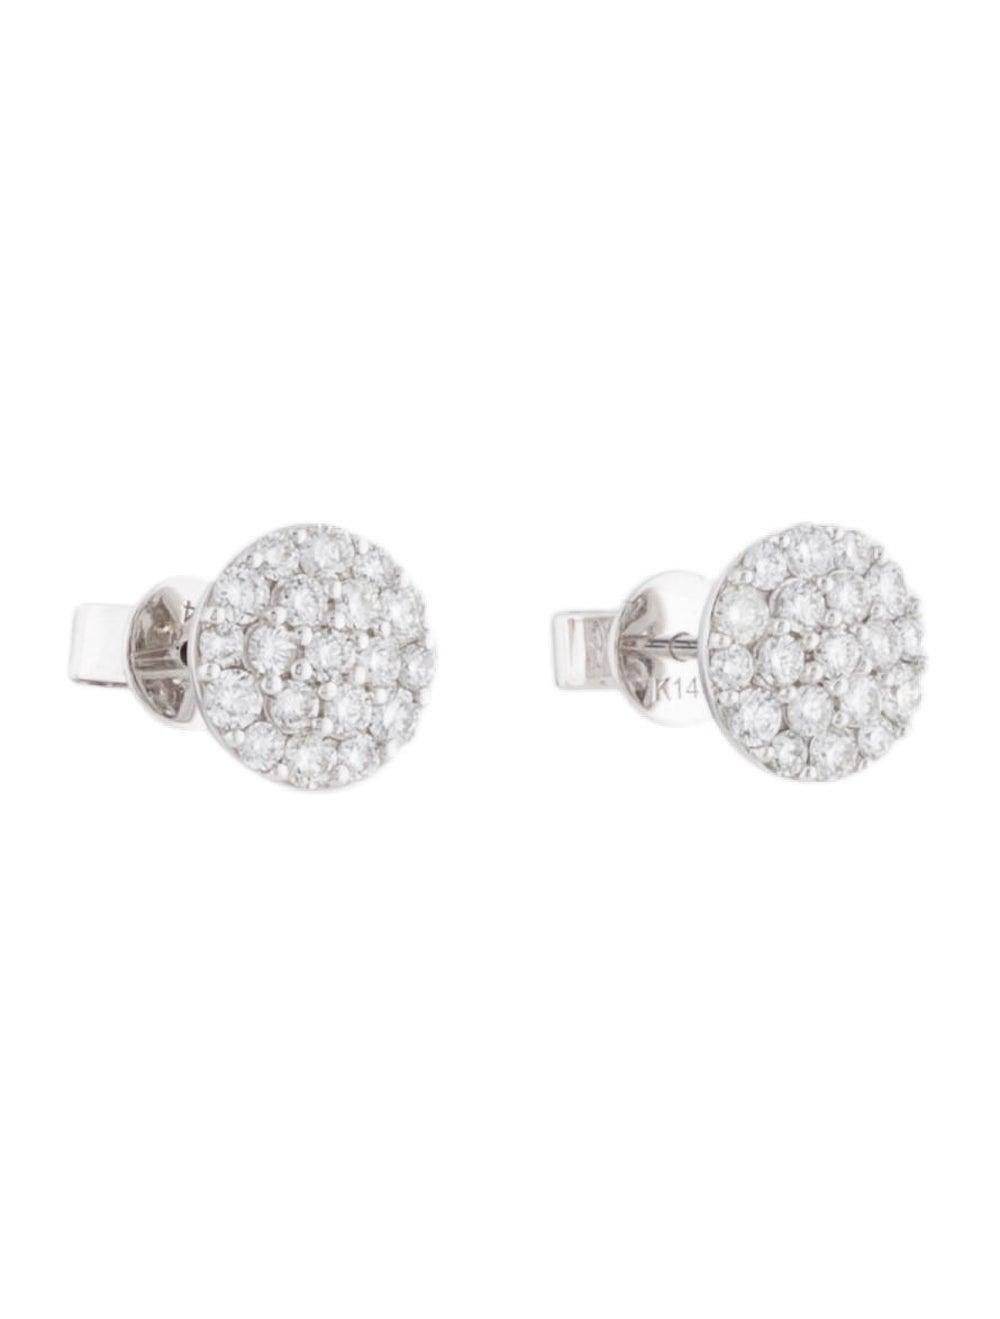 These Beautfiul and Shimmering Diamond Cluster Stud Earrings are crafted of 14K Gold and feature 0.72cts of Round White Diamonds, with butterfly push-back closure.
 
 14K White Gold
 0.72cts White Diamonds
 Shape Round
 Color GH
 Clarity SI1
